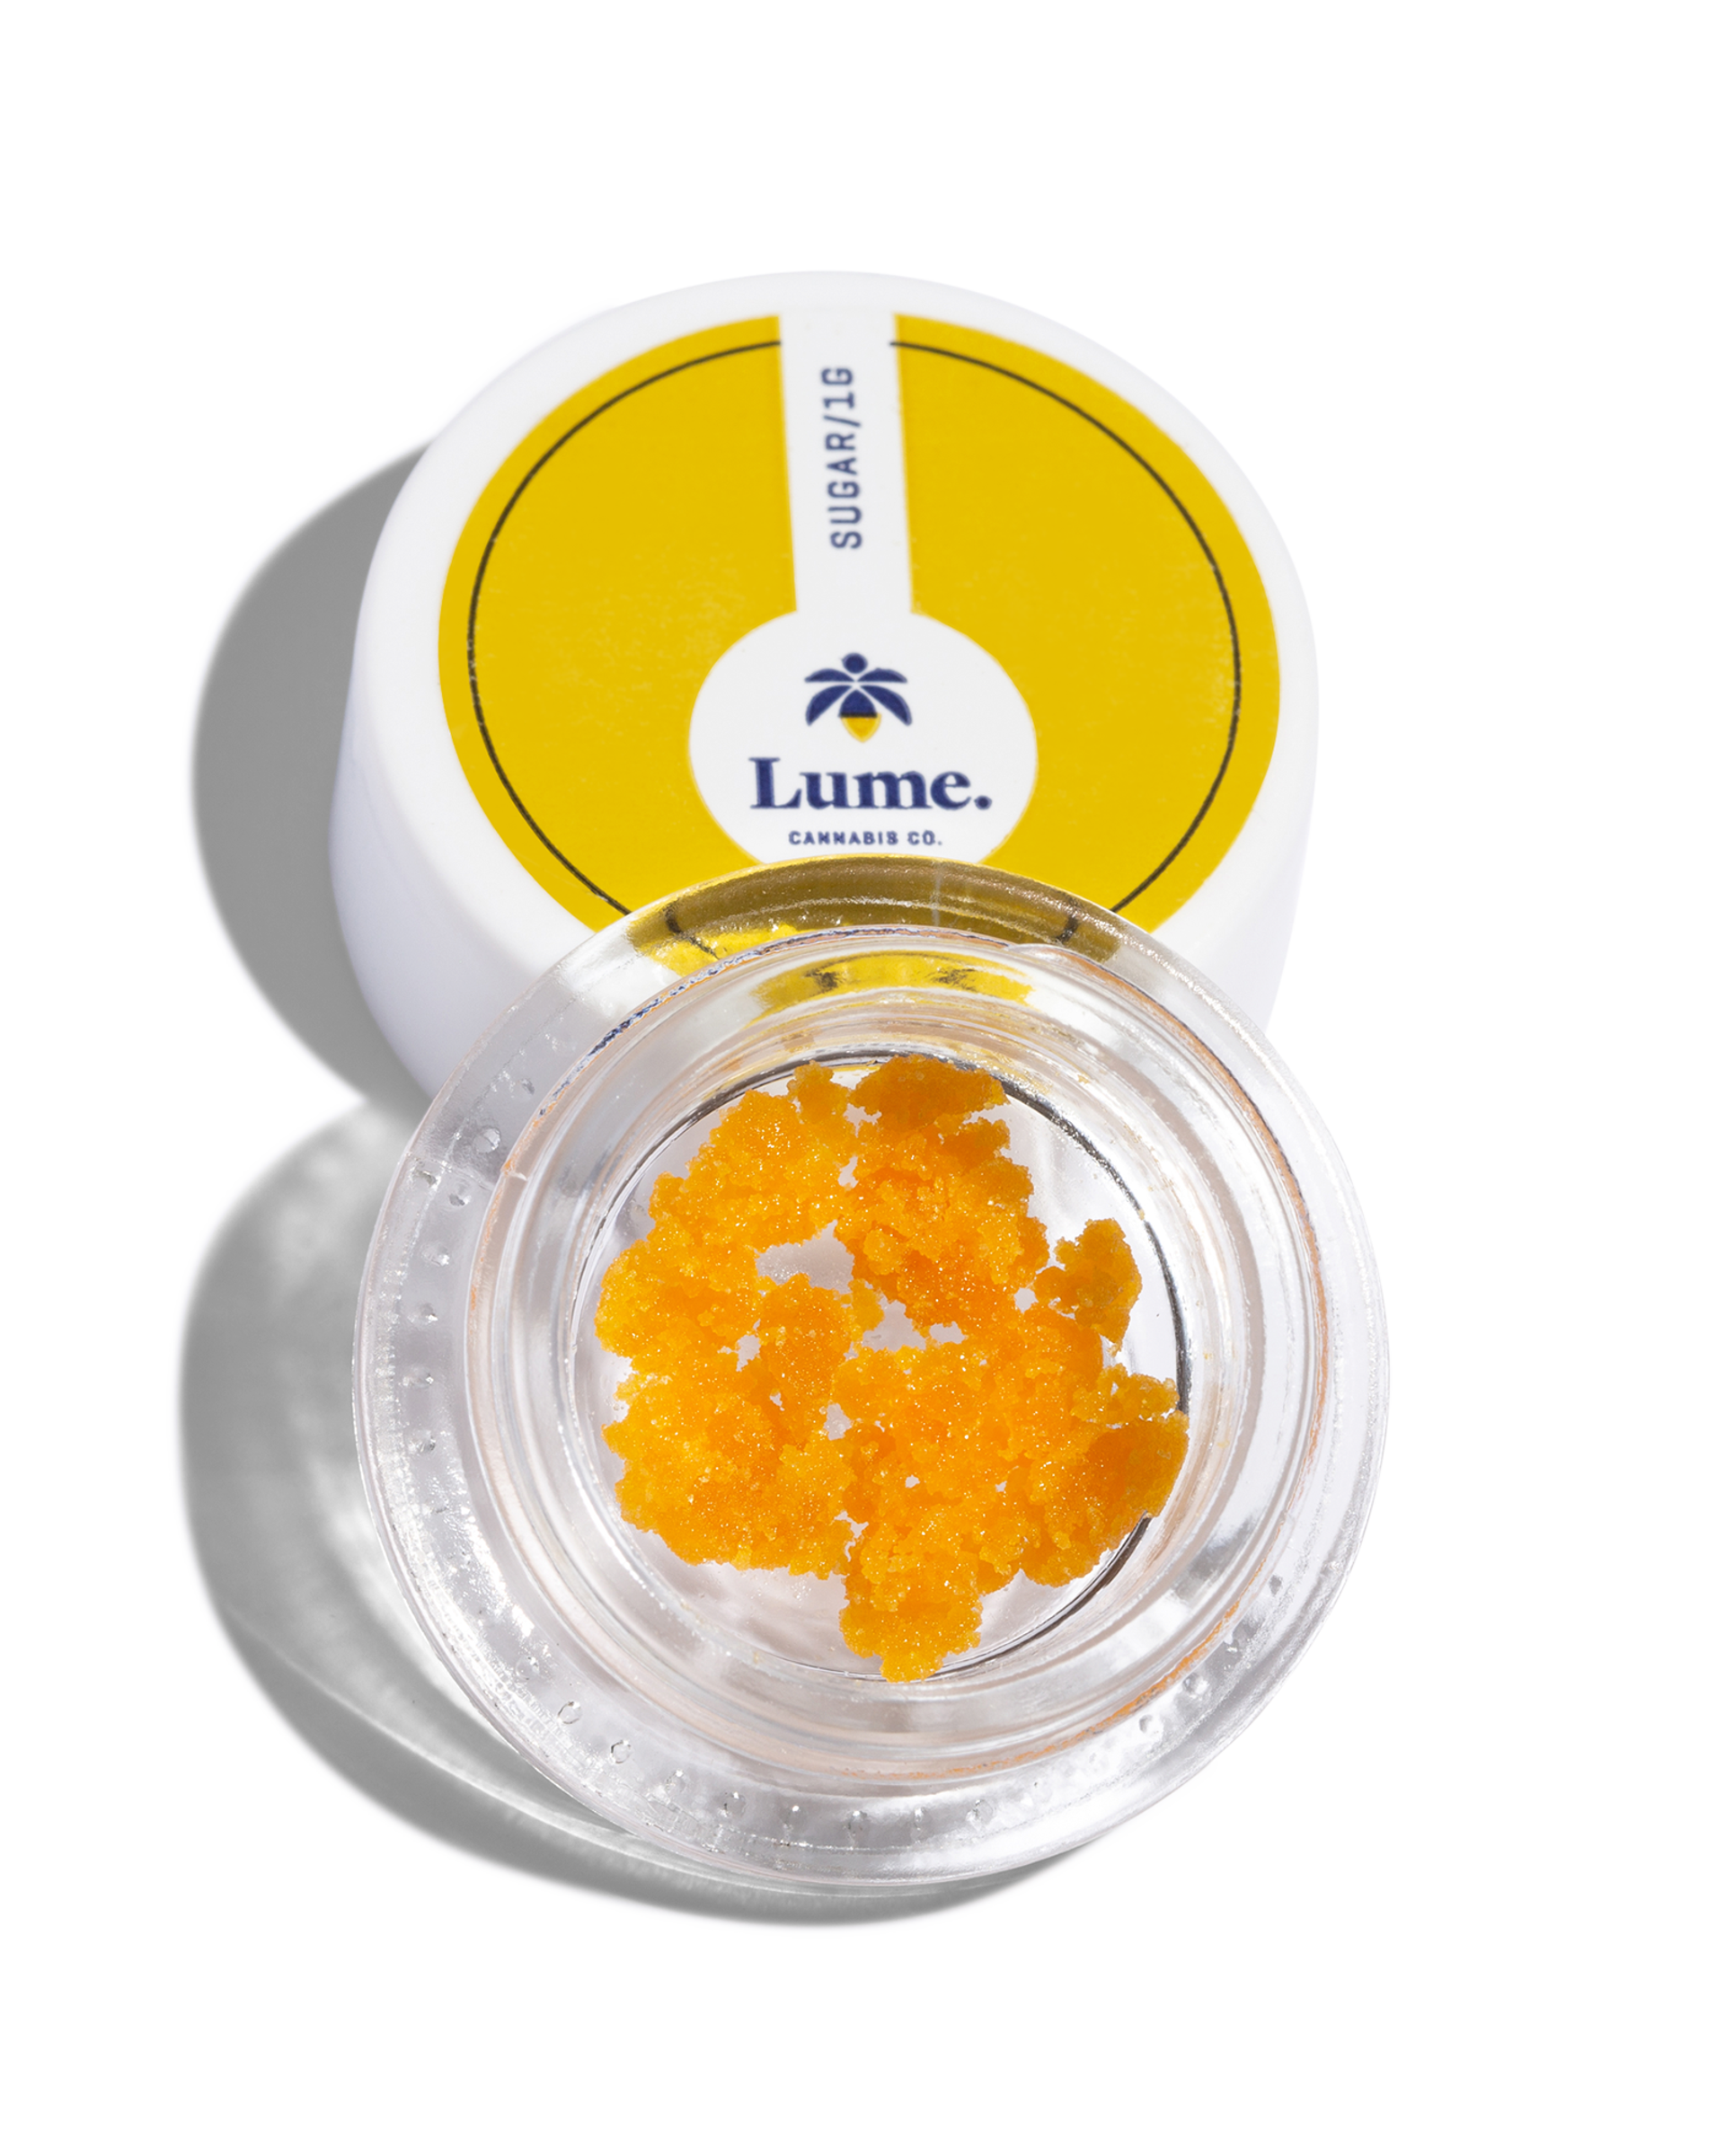 Blueberry Crumble Live Resin Sugar 1g, 1 of 2